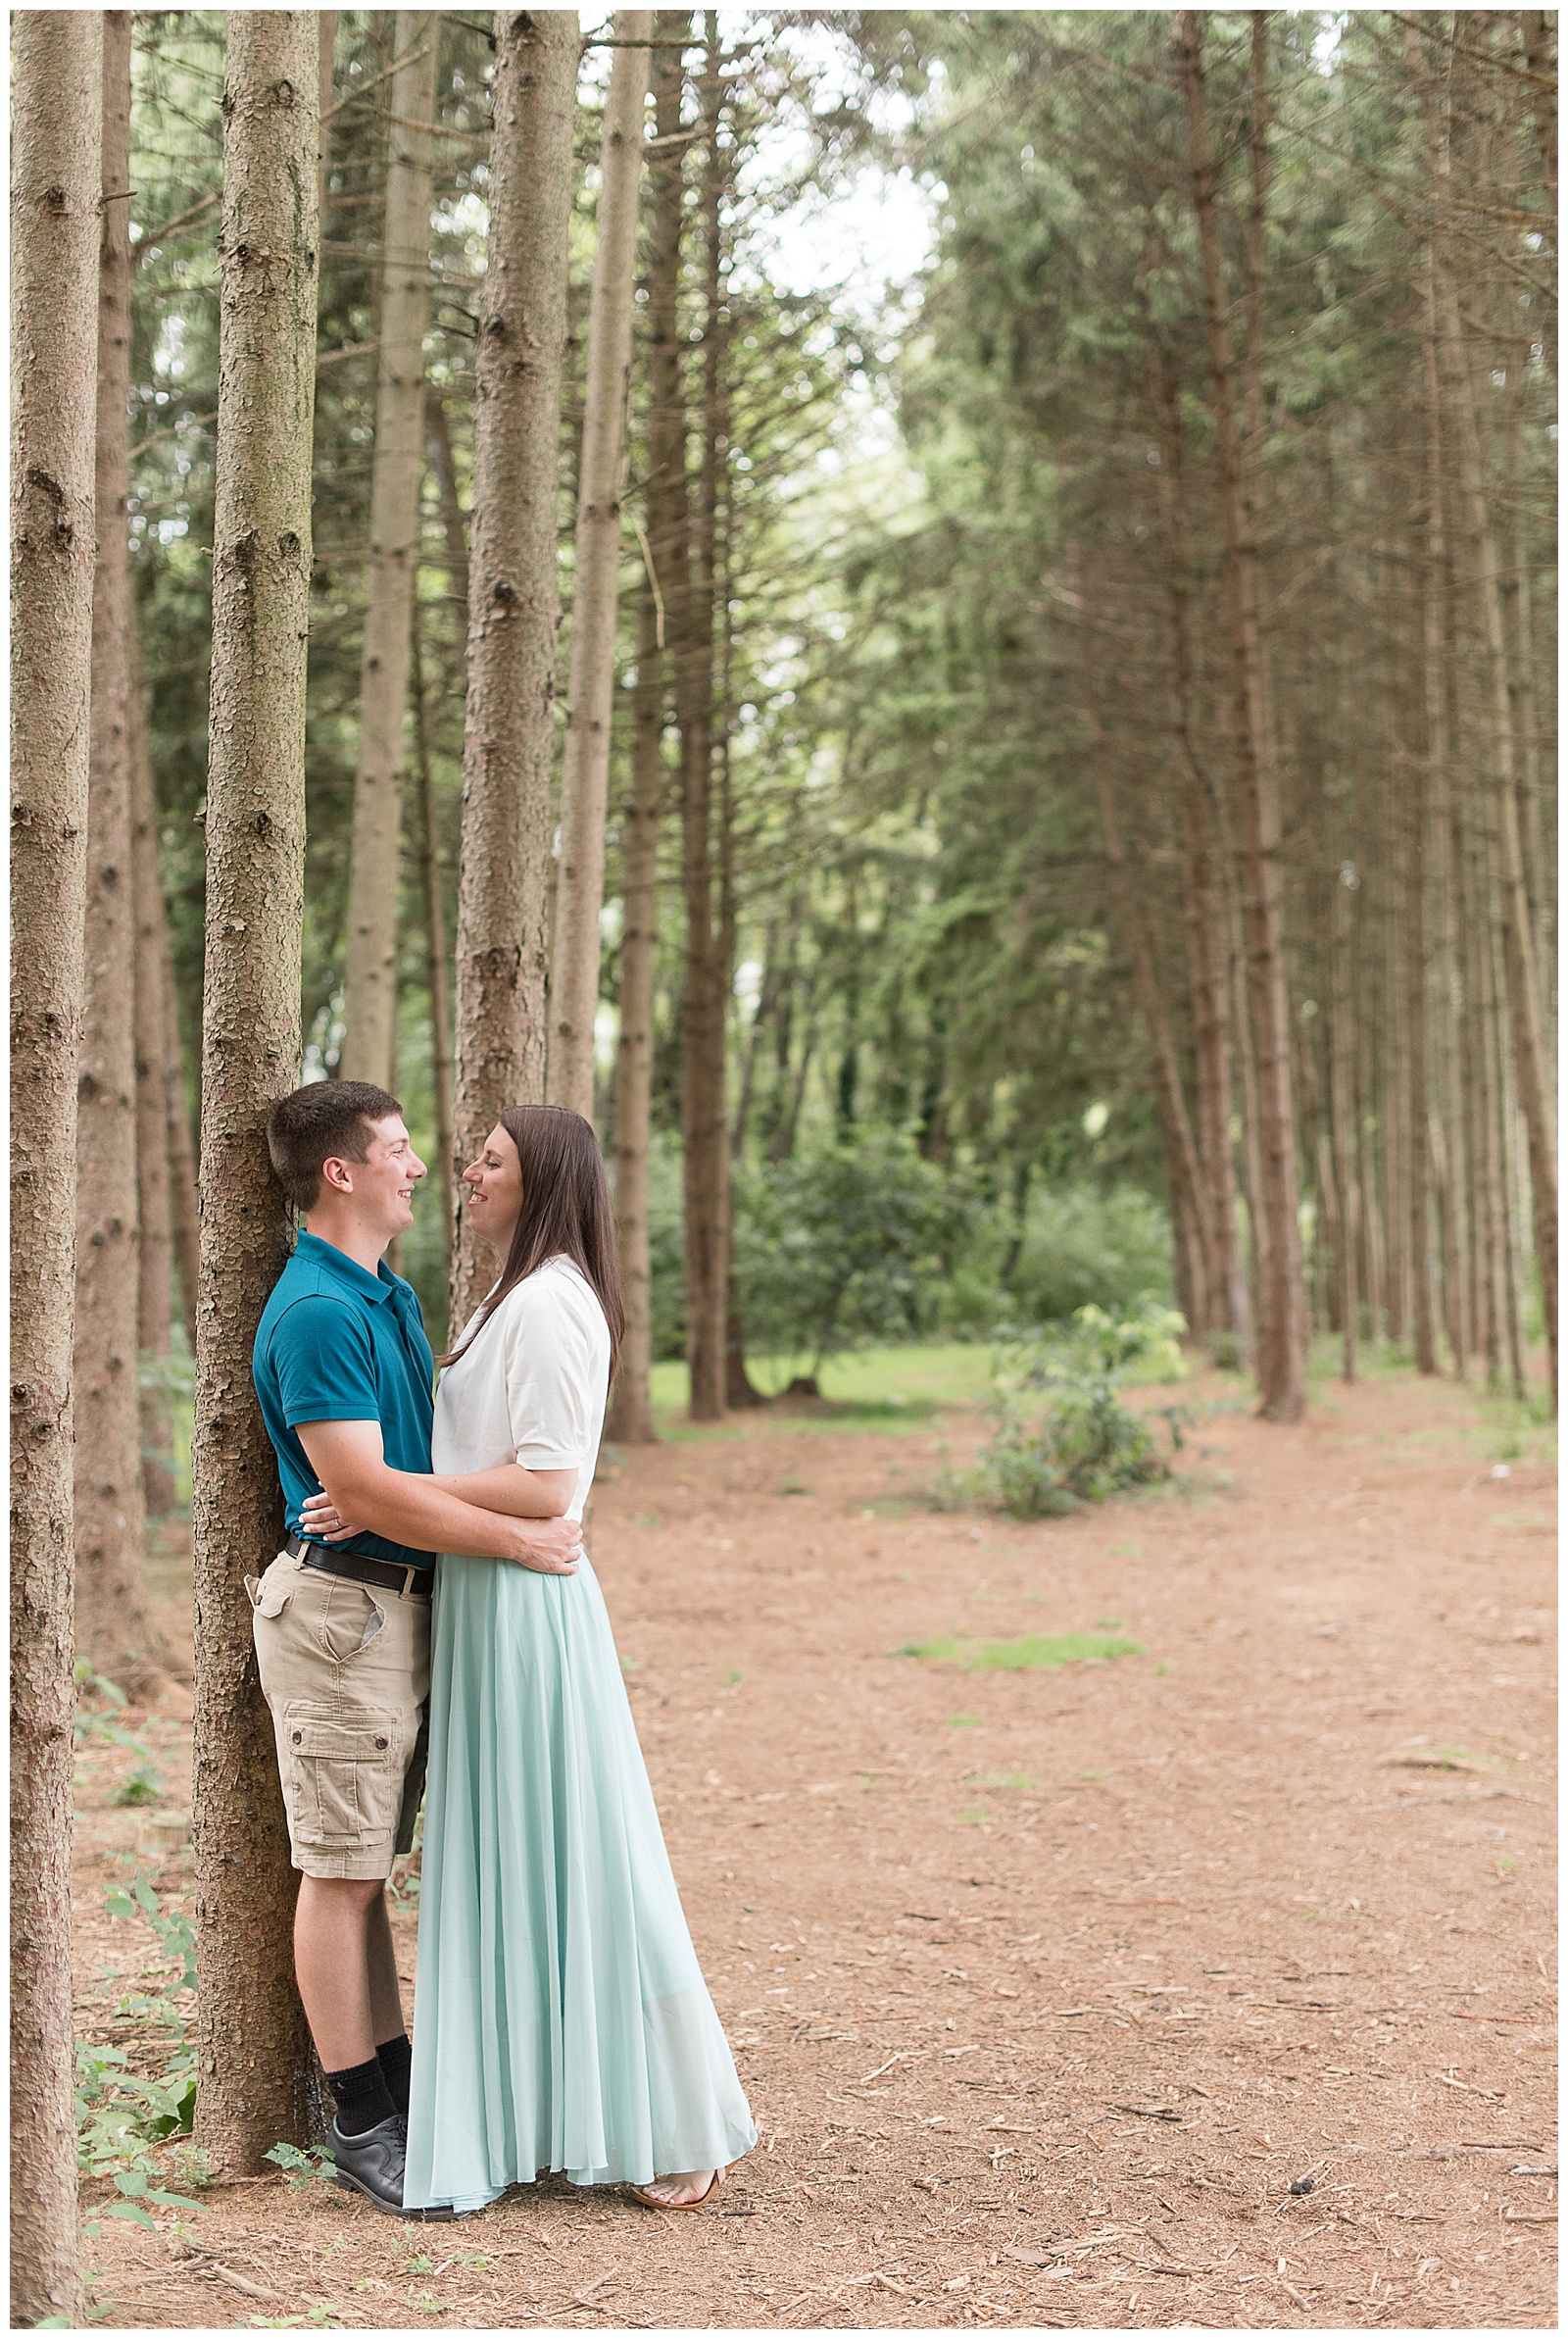 the couple is standing close together face-to-face looking at each other and smiling as the guy is on the left leaning against one of the evergreen trees and the girl is on the right and their arms are around each other's waist while standing on the path surrounded by the rows of evergreen trees at Overlook Park in Lancaster, PA